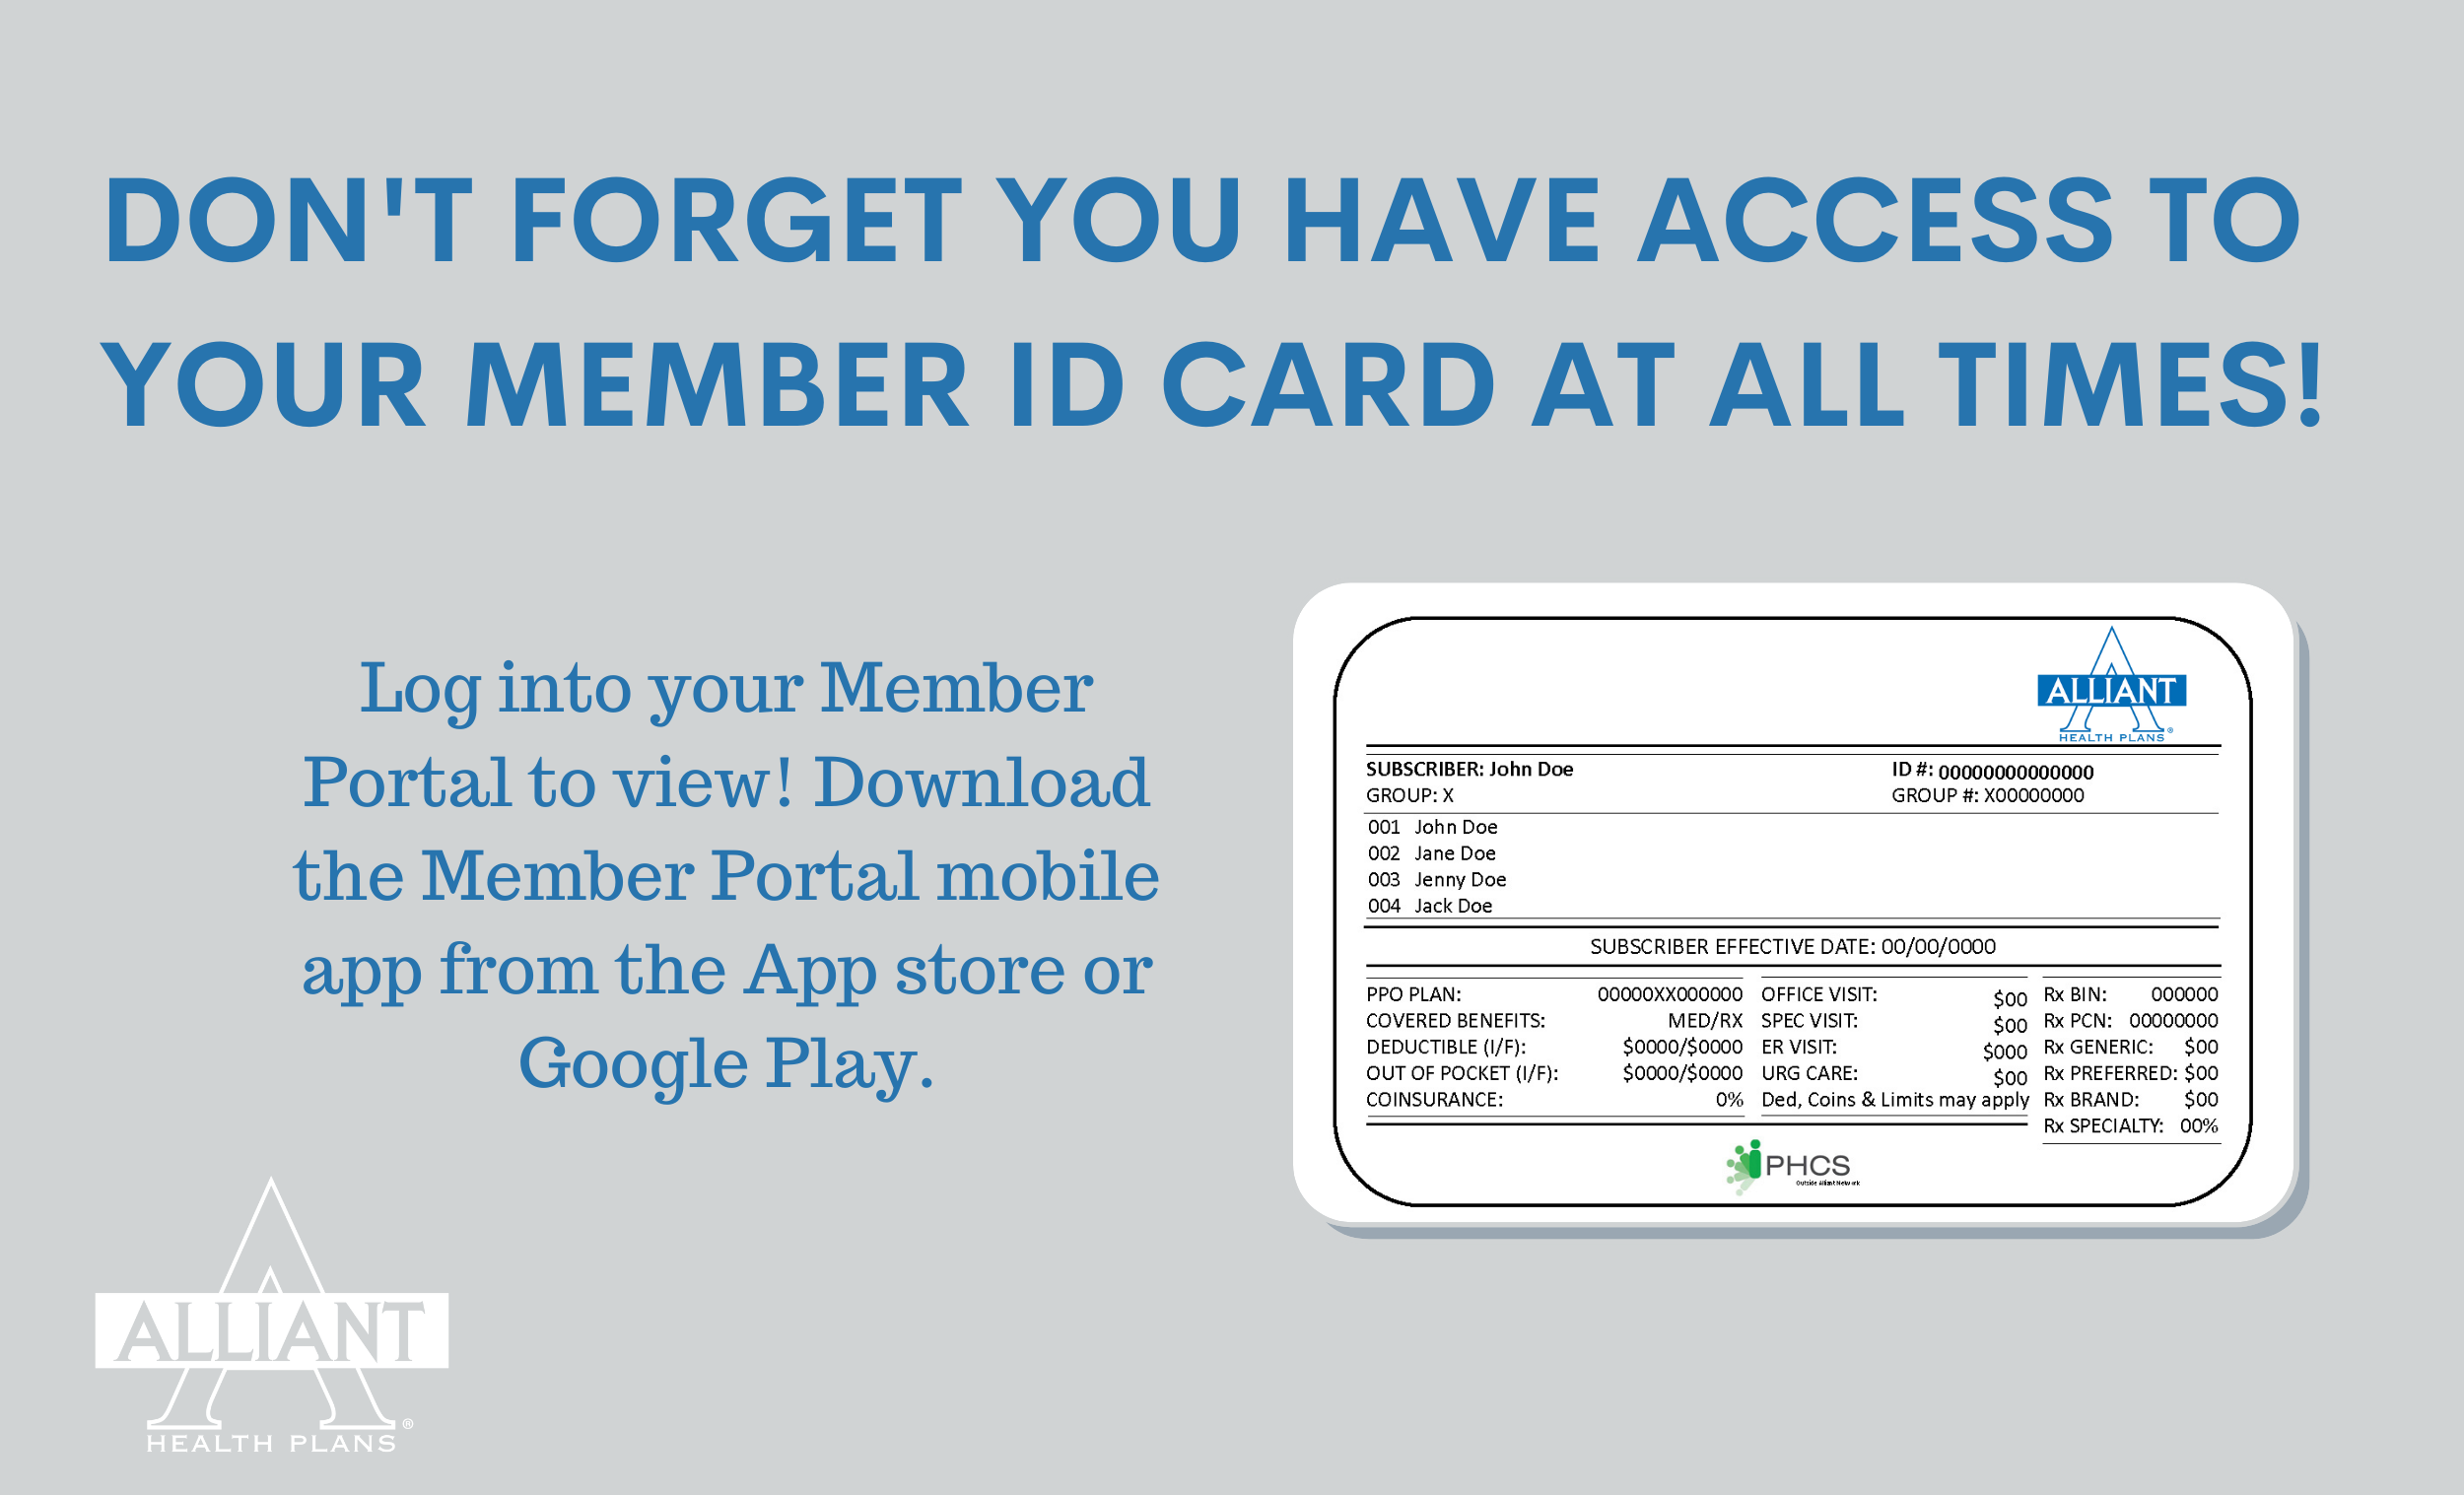 Don't Forget You Have Access To Your Member ID Card on The Alliant Plans App